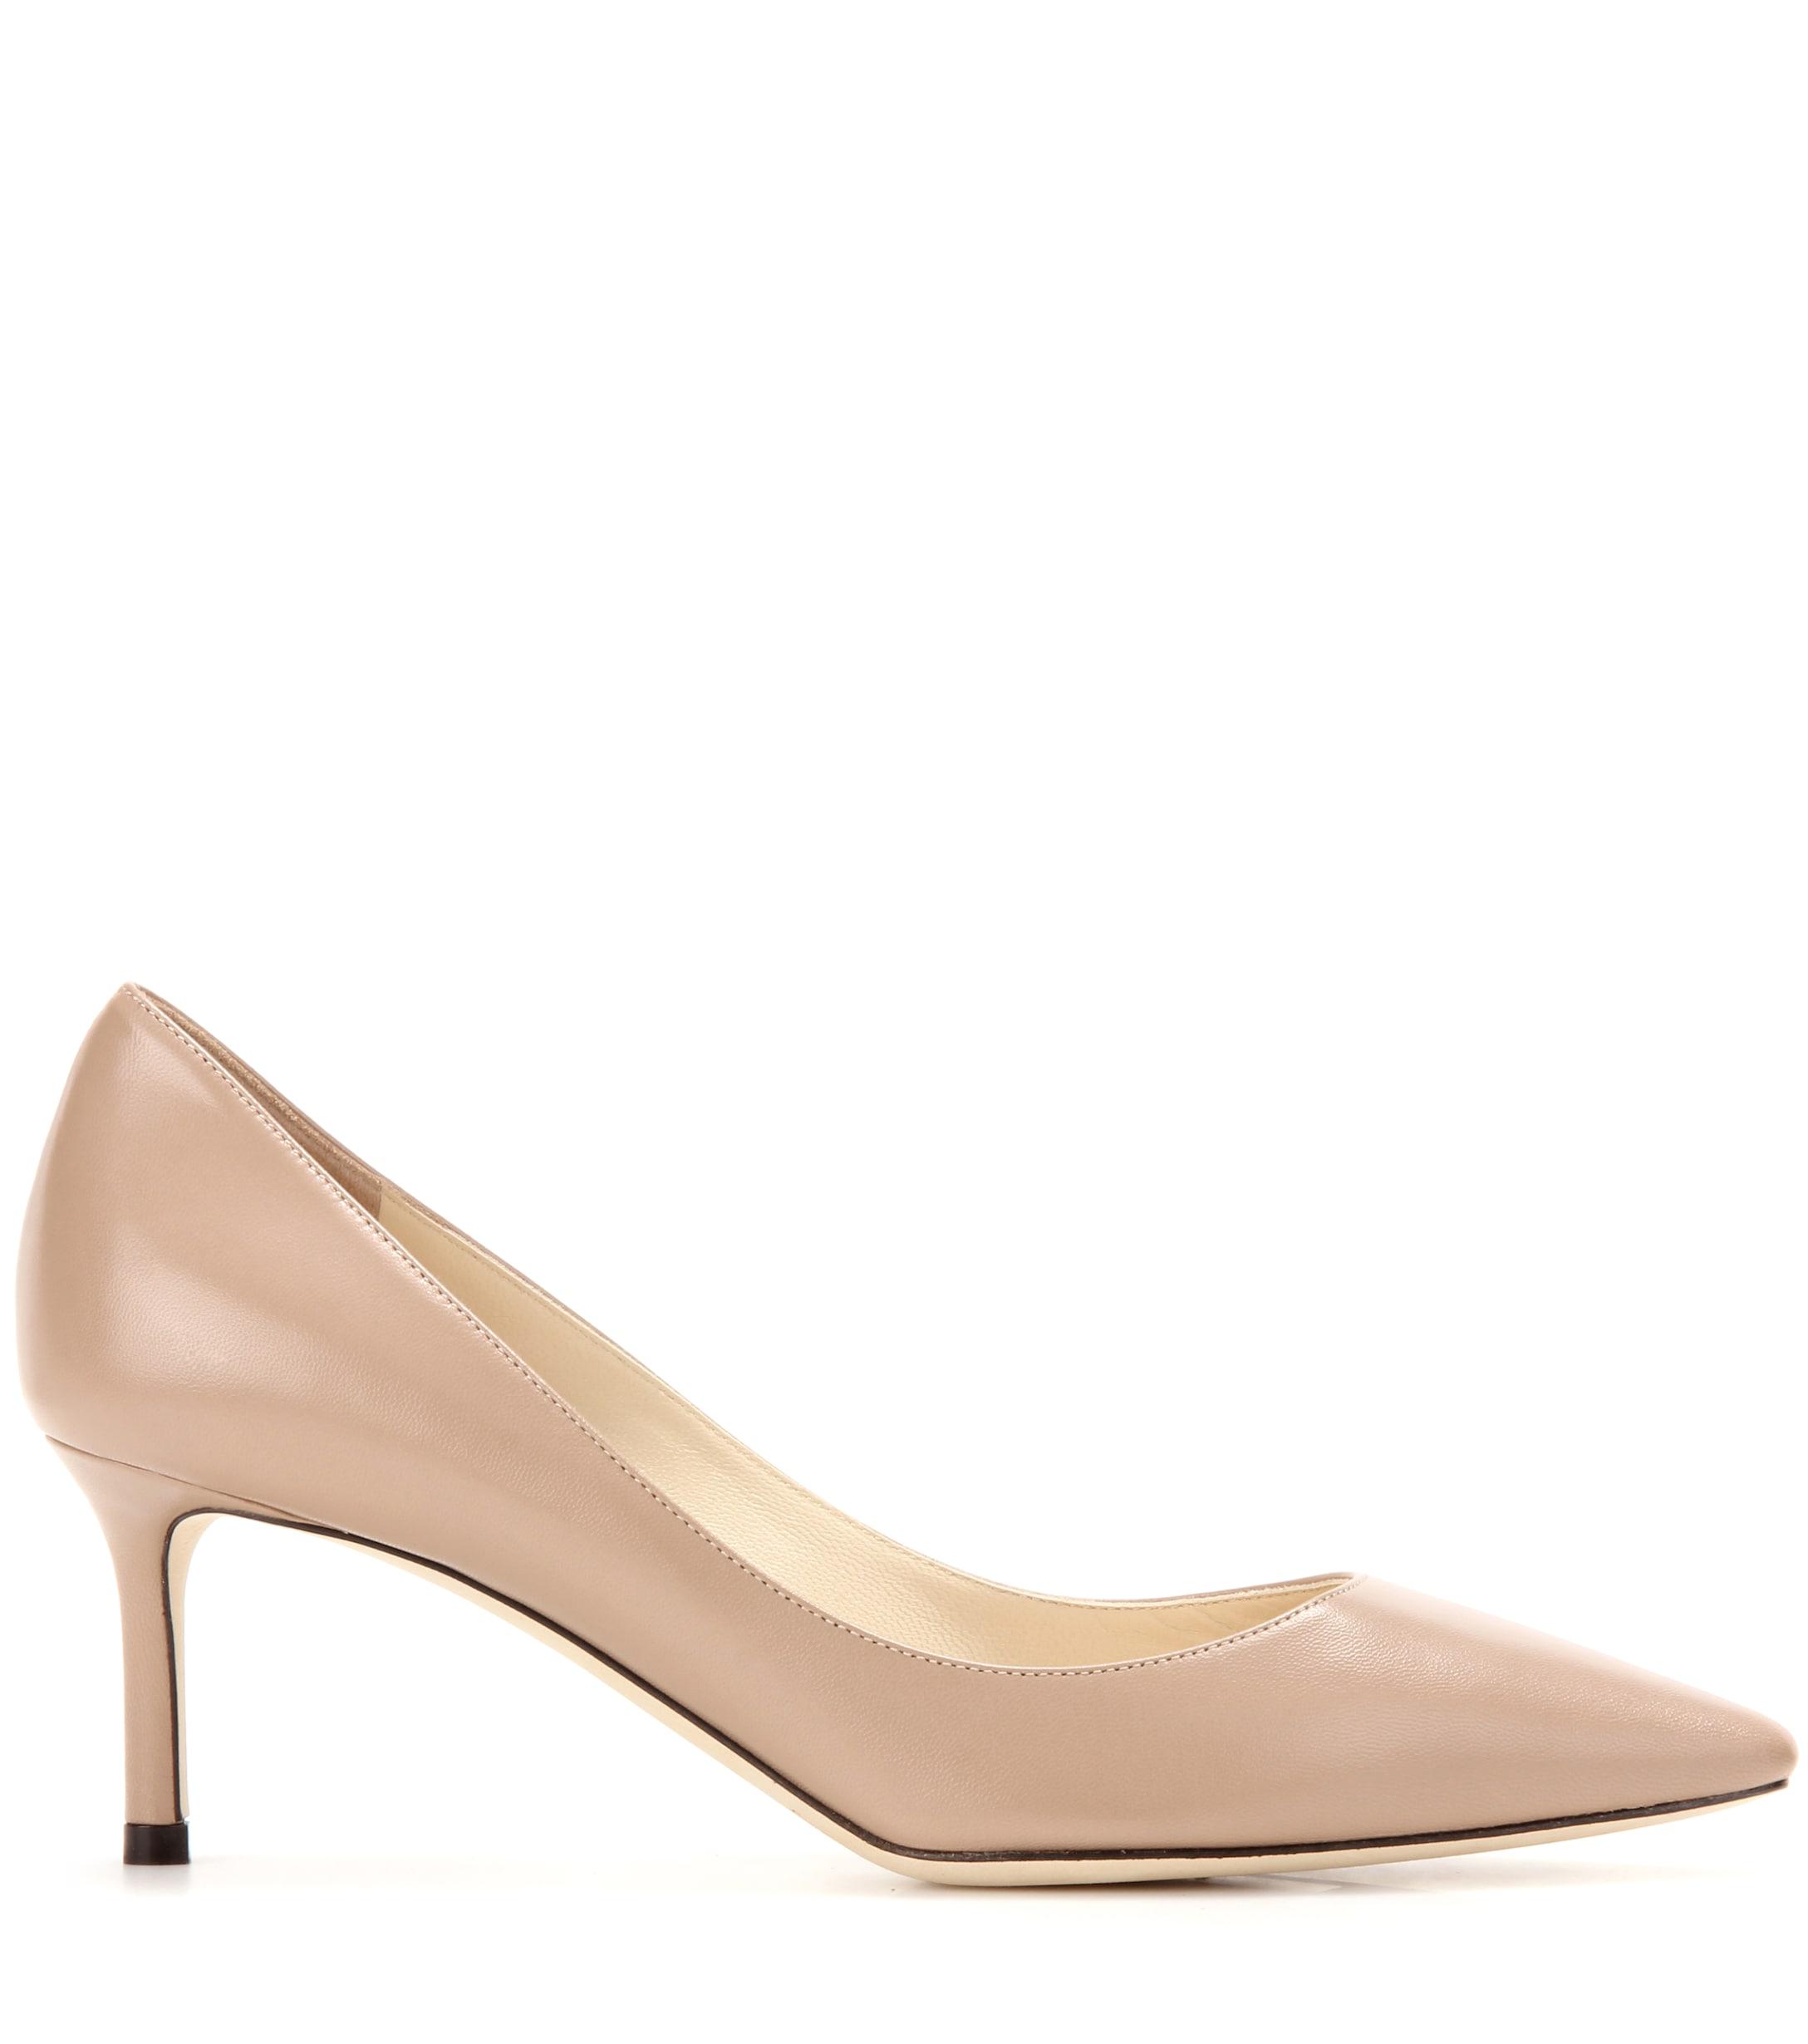 Jimmy Choo Romy 60 Patent Leather Pumps in Beige (Natural) - Save 8% - Lyst